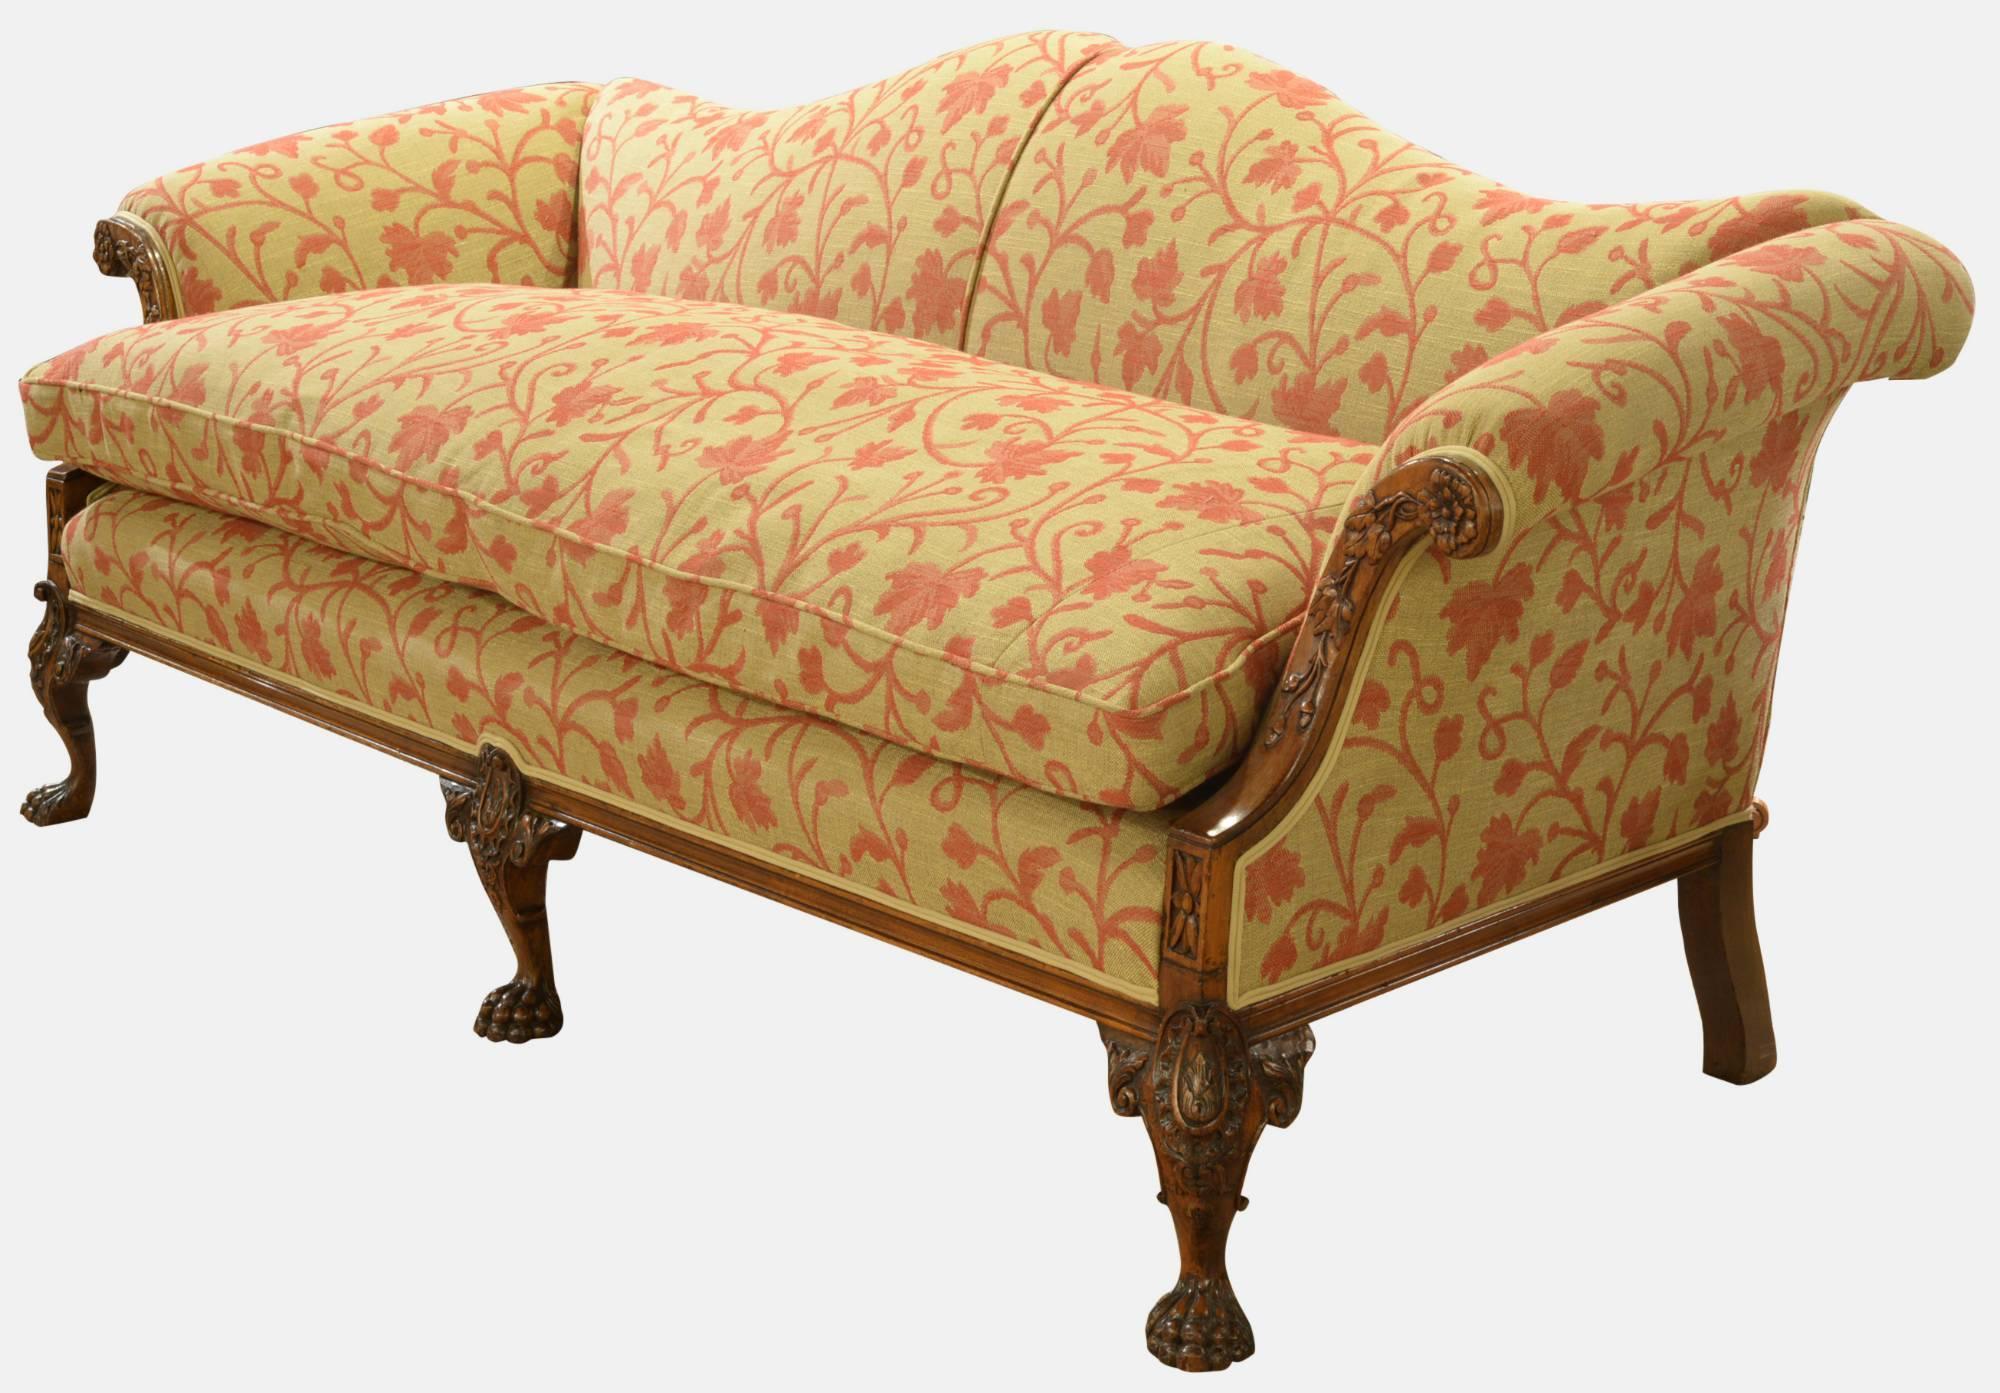 A George III style camel back sofa on cabriole legs. Re upholstered.

circa 1920.